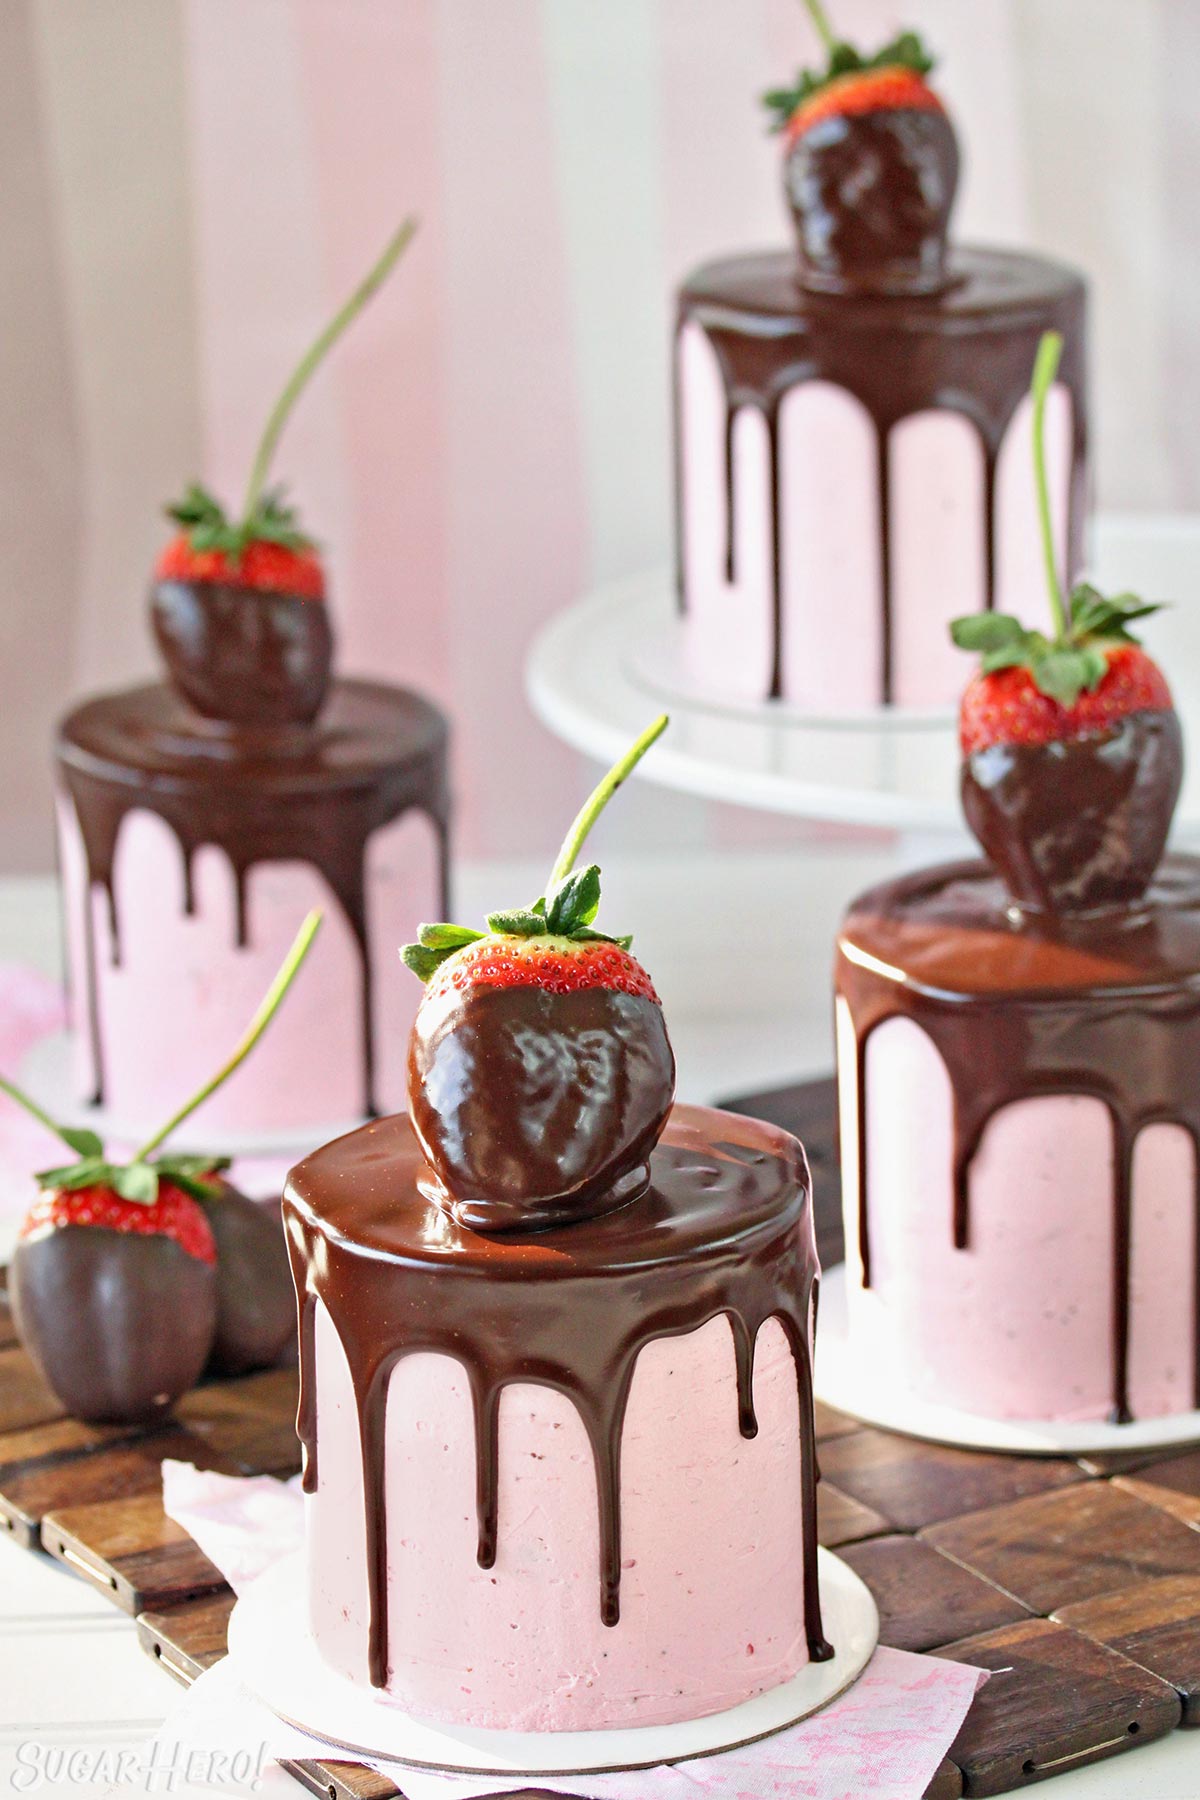 Chocolate-Covered Strawberry Cakes - Four separate cakes with chocolate dripping down the sides, and chocolate covered strawberry's on top. | From SugarHero.com